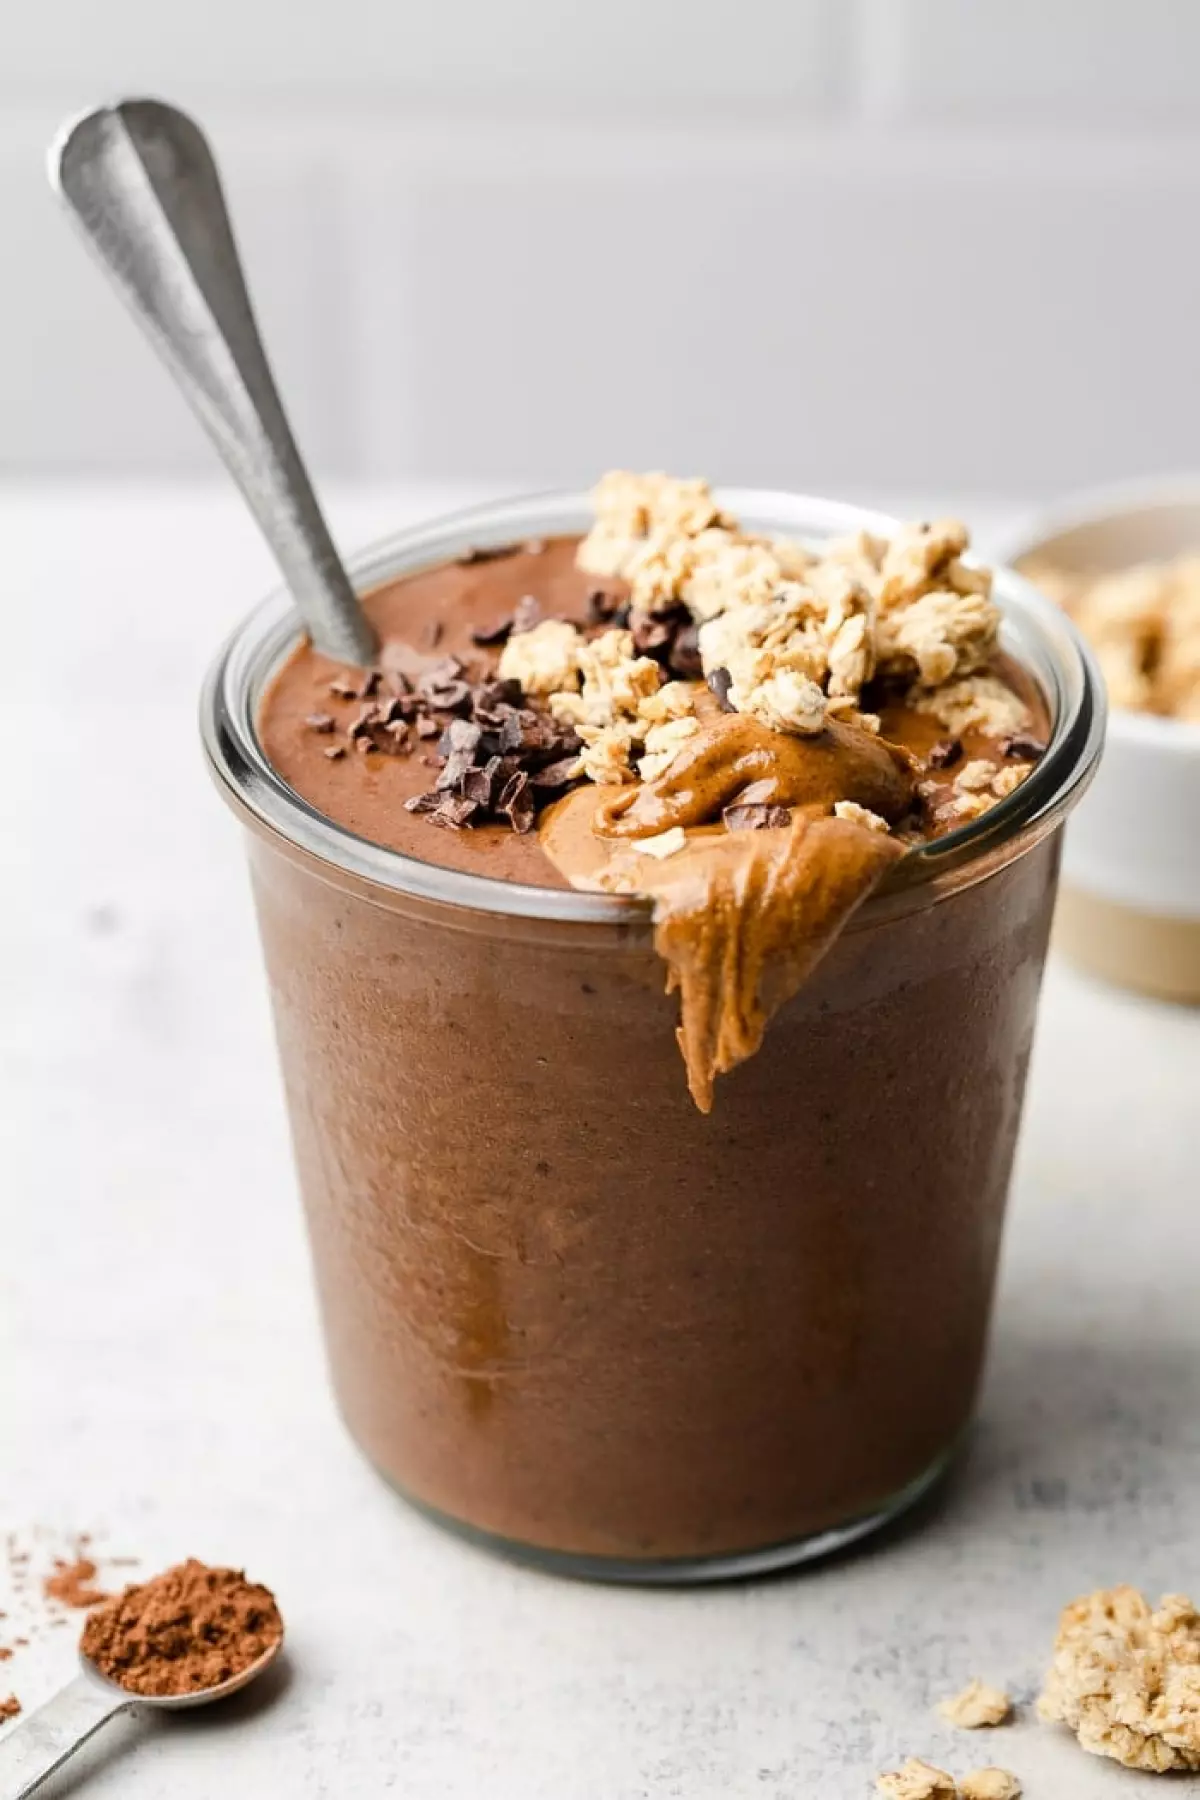 Chocolate protein smoothie in a glass jar topped with granola and nut butter. There is a spoon in the jar as well.